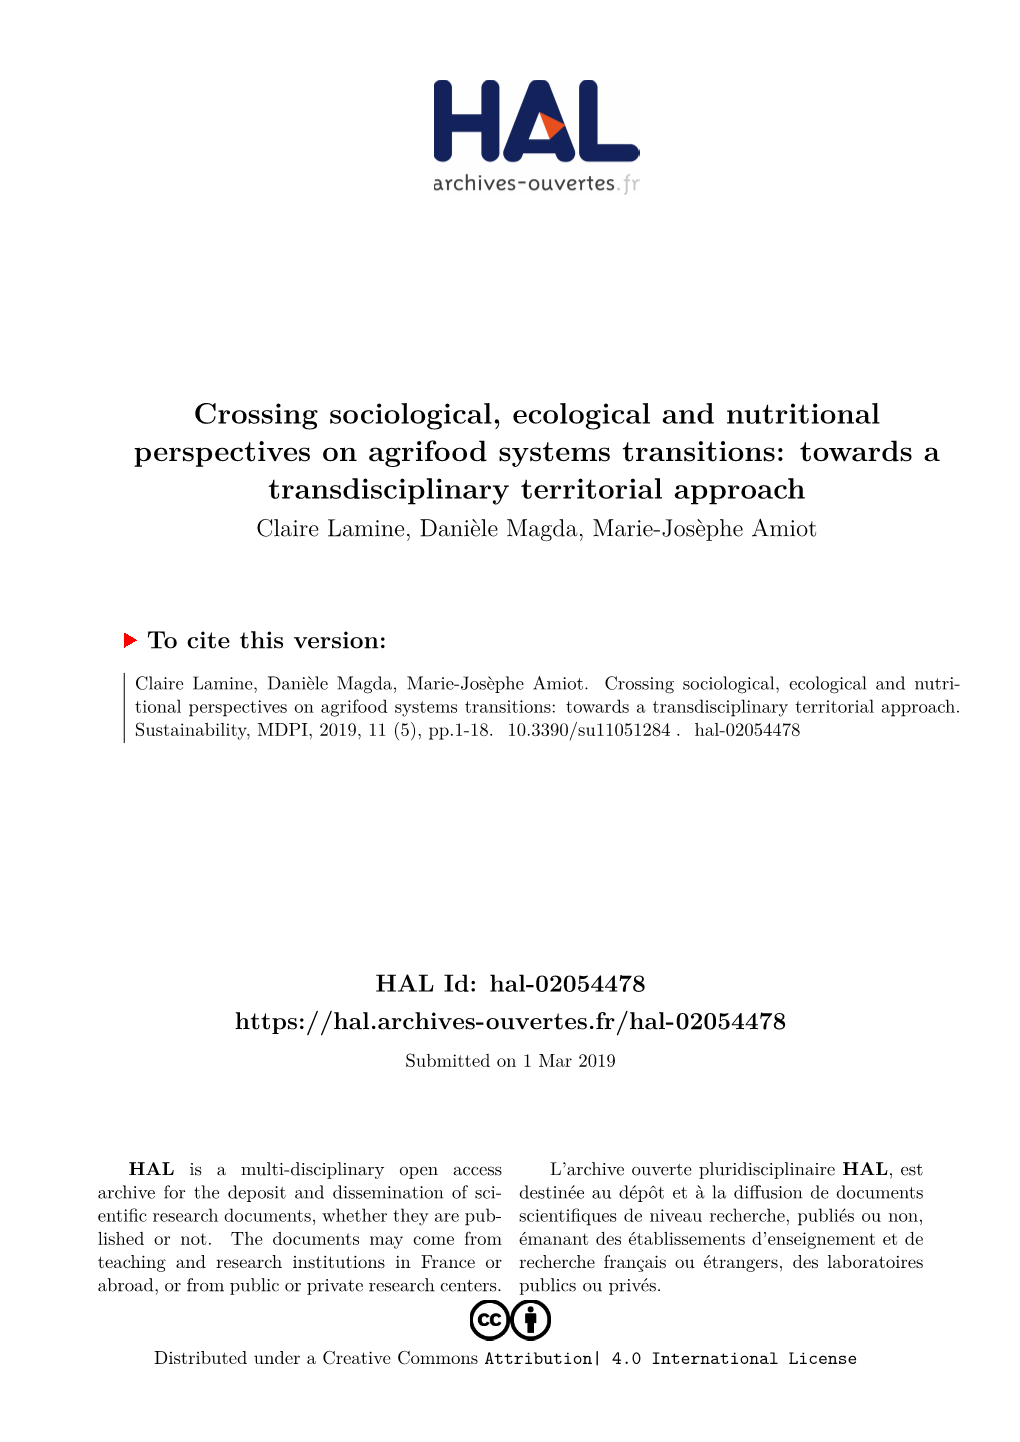 Crossing Sociological, Ecological and Nutritional